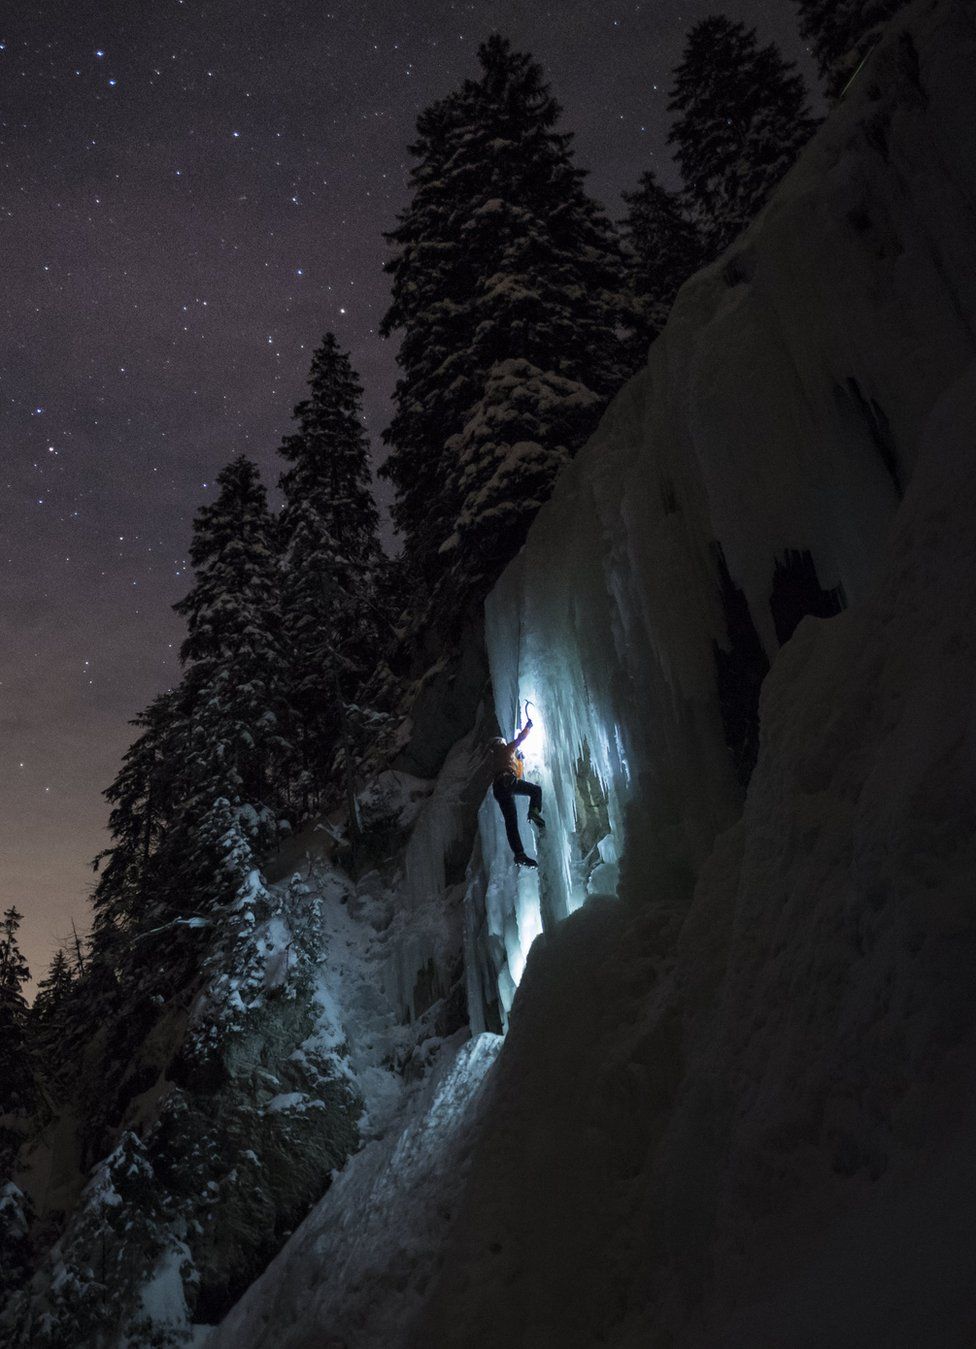 A climber moves up an ice cascade in Switzerland.